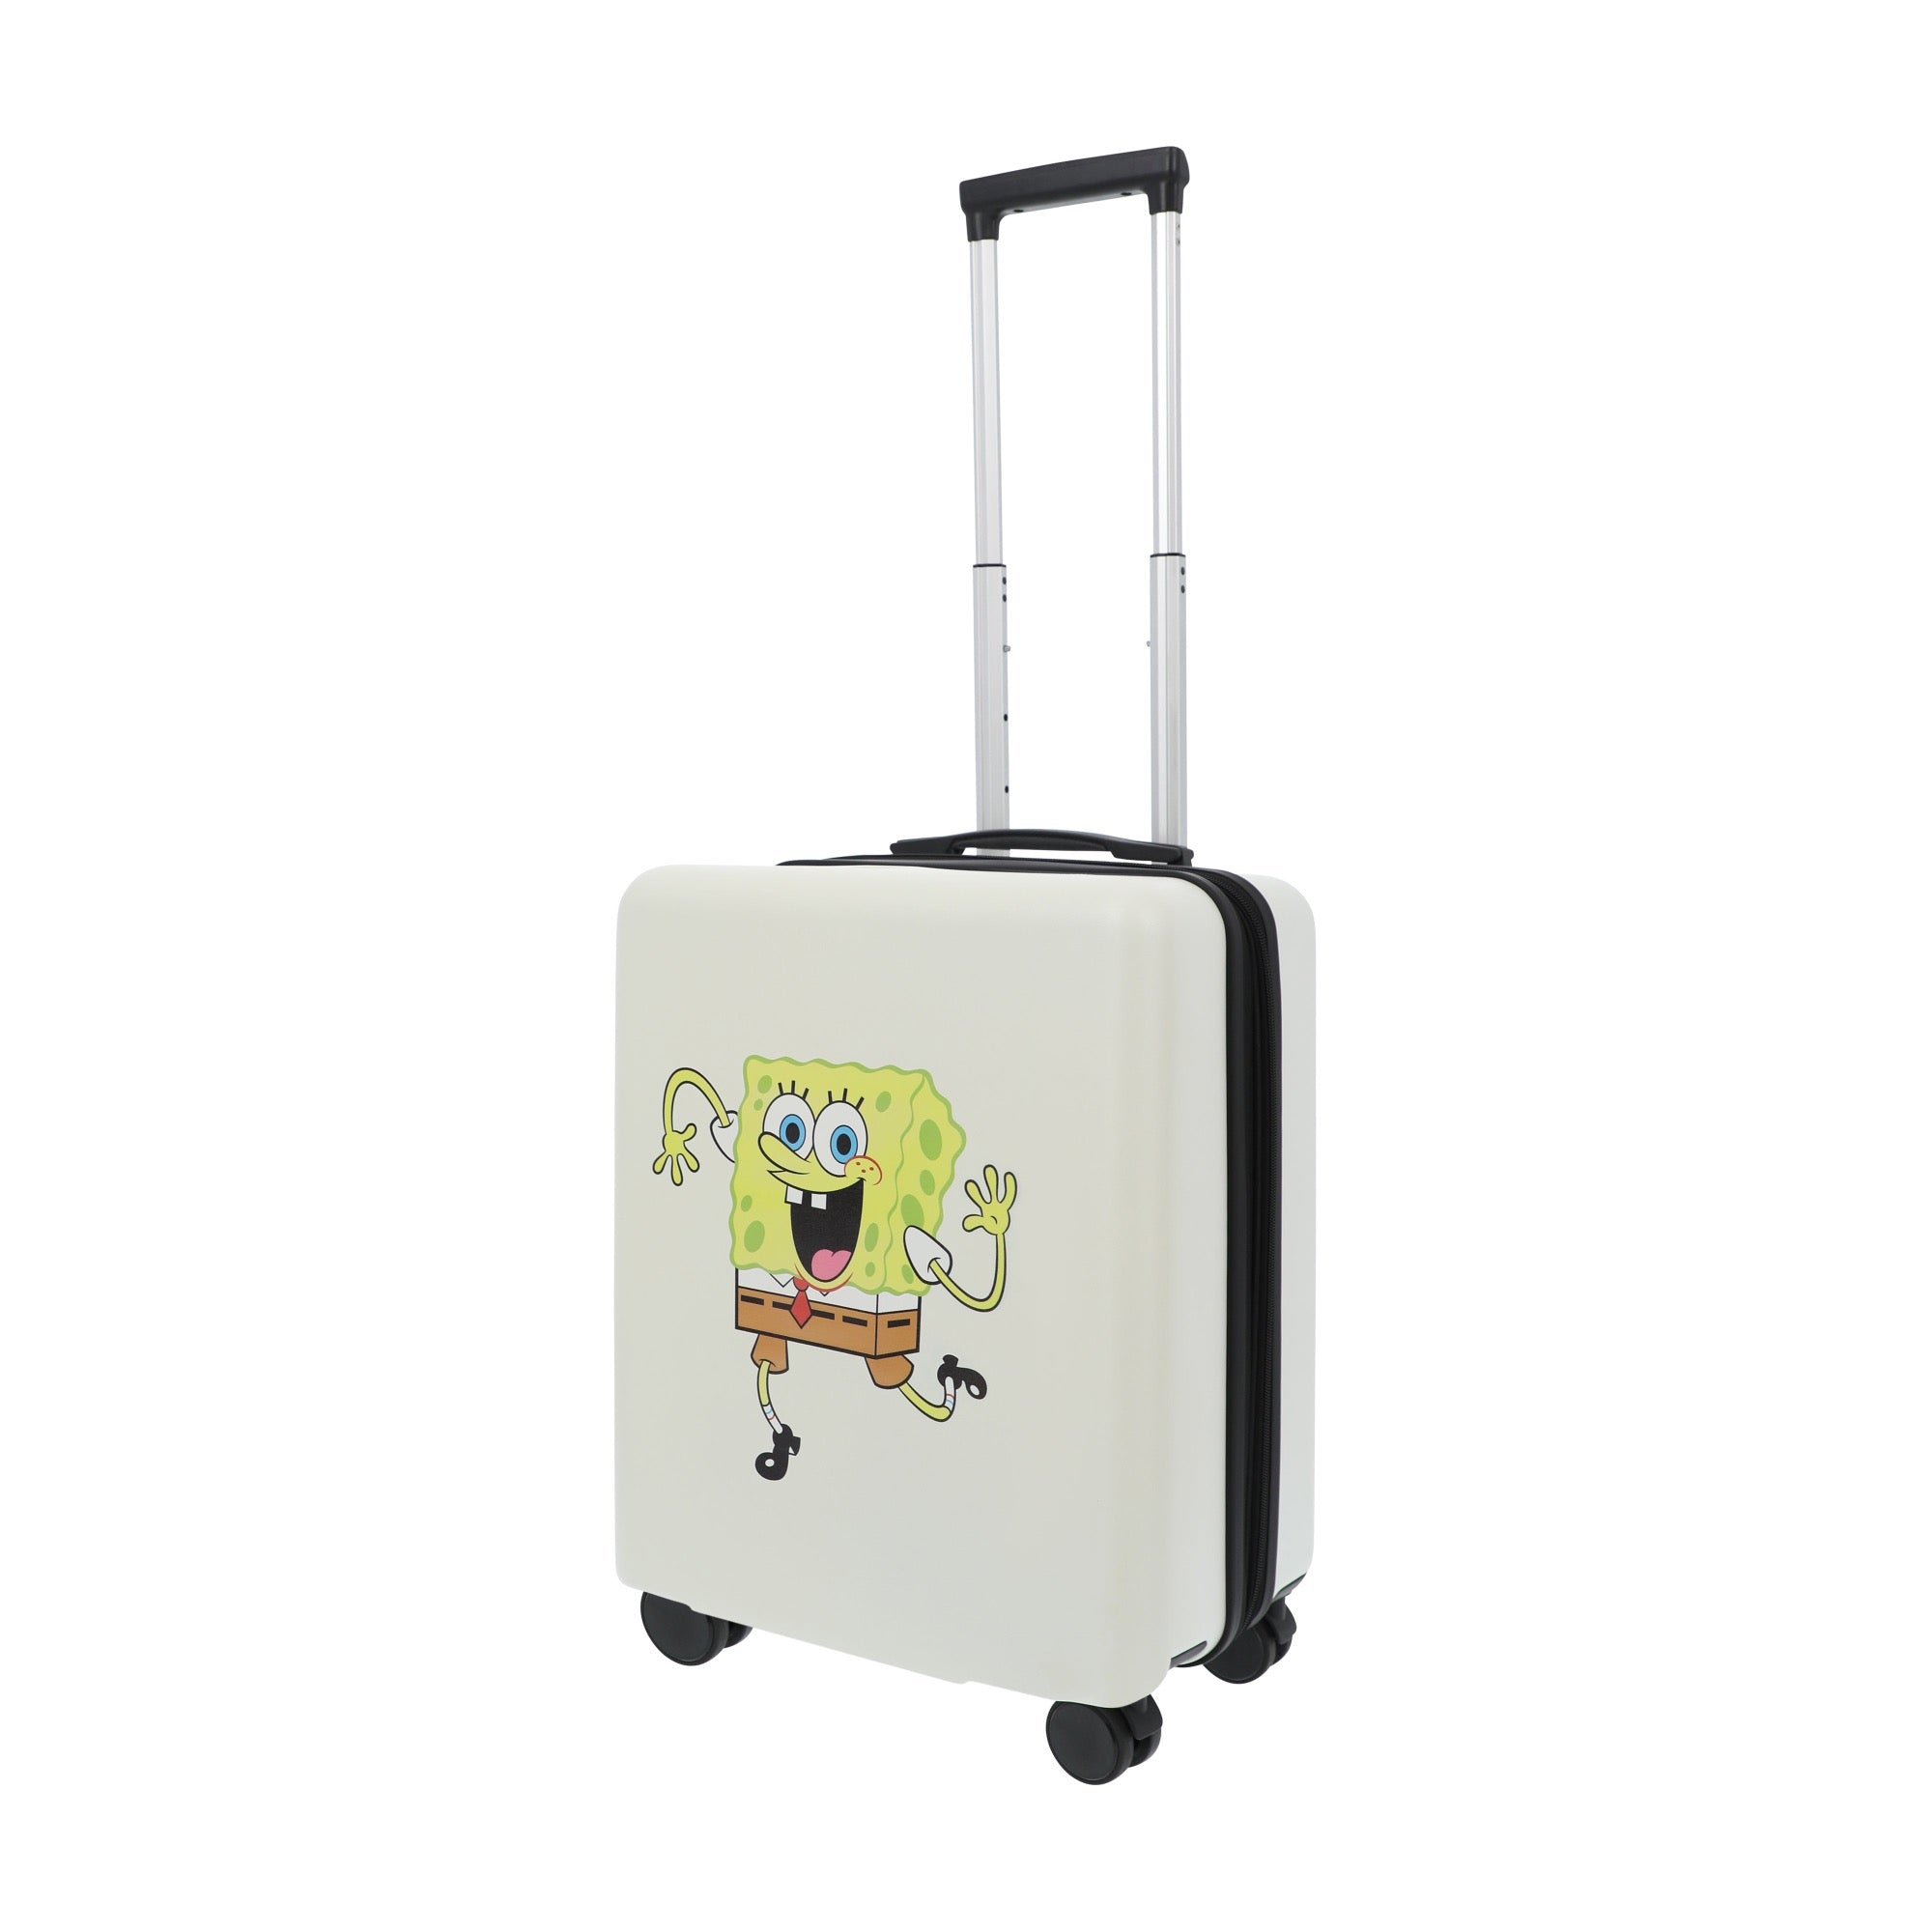 White nickelodeon spongeBob 22.5" carry-on spinner suitcase luggage by Ful